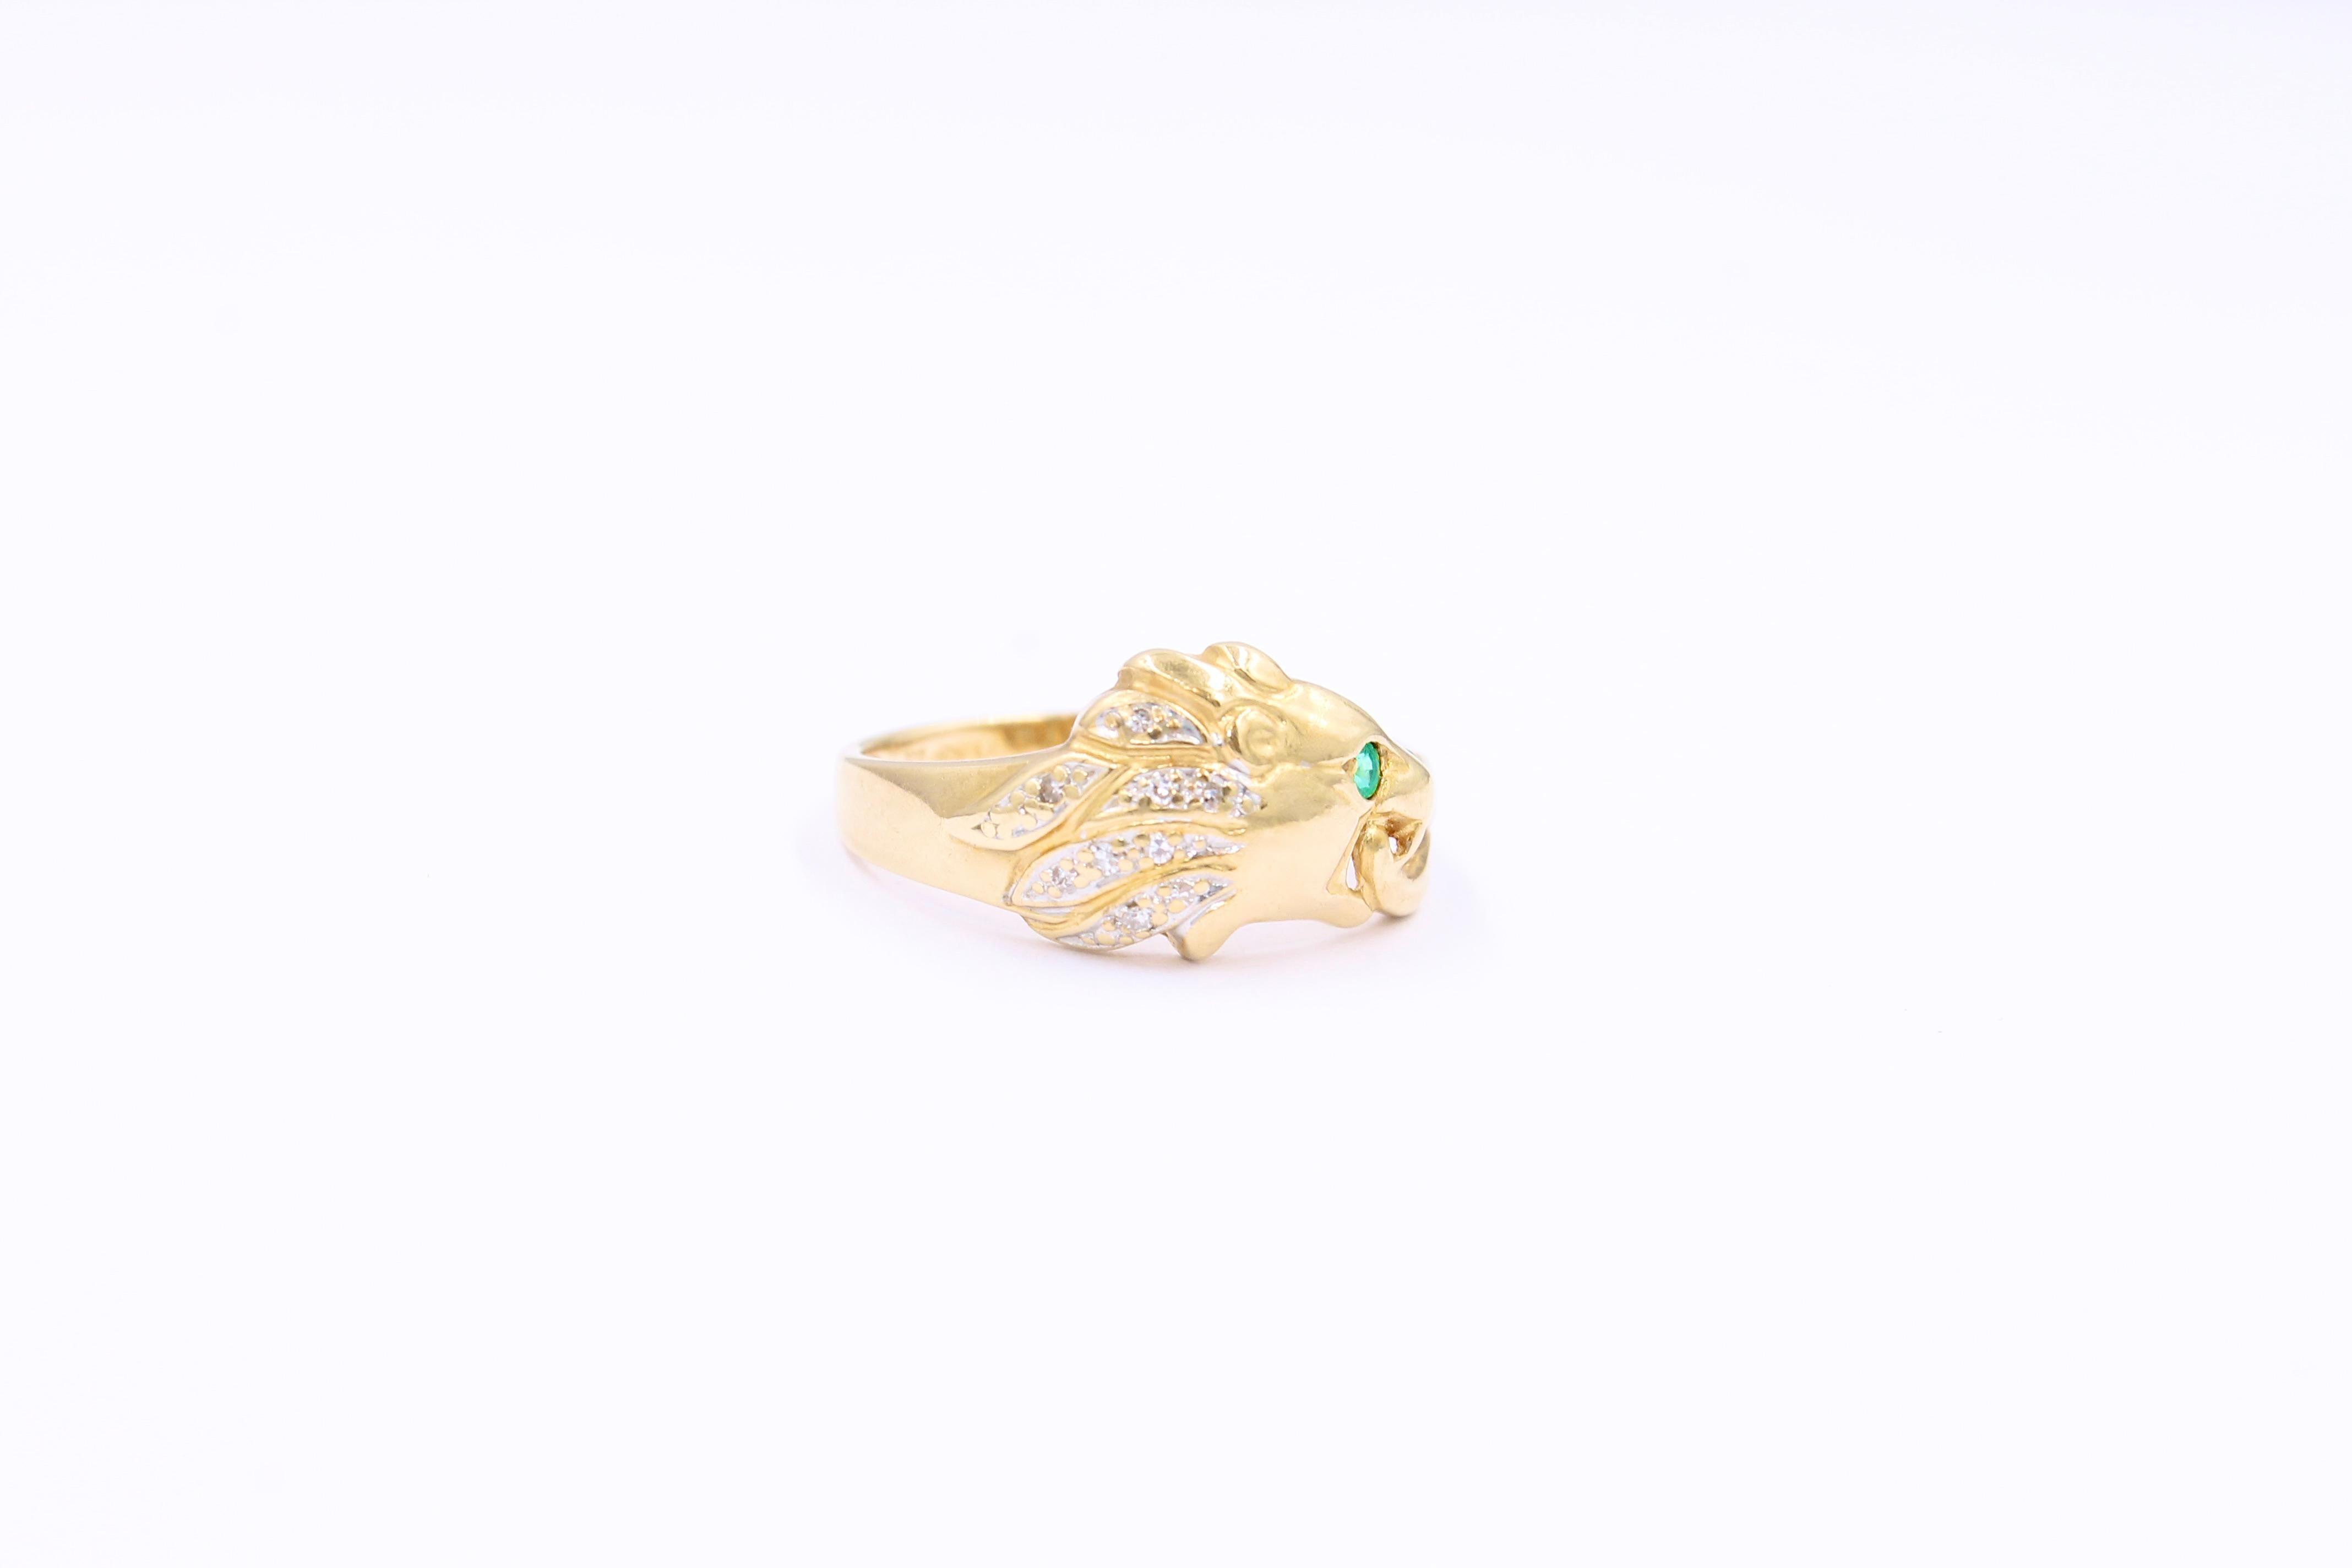 Ring made of yellow gold 18 Karat (stamped with 750, see picture). 

De ring is very well made with great details. The eye of the eagle is made out of an emerald.

The feathers are made of diamonds. Diamonds of 8/8 cut and rose cut. 

There is a